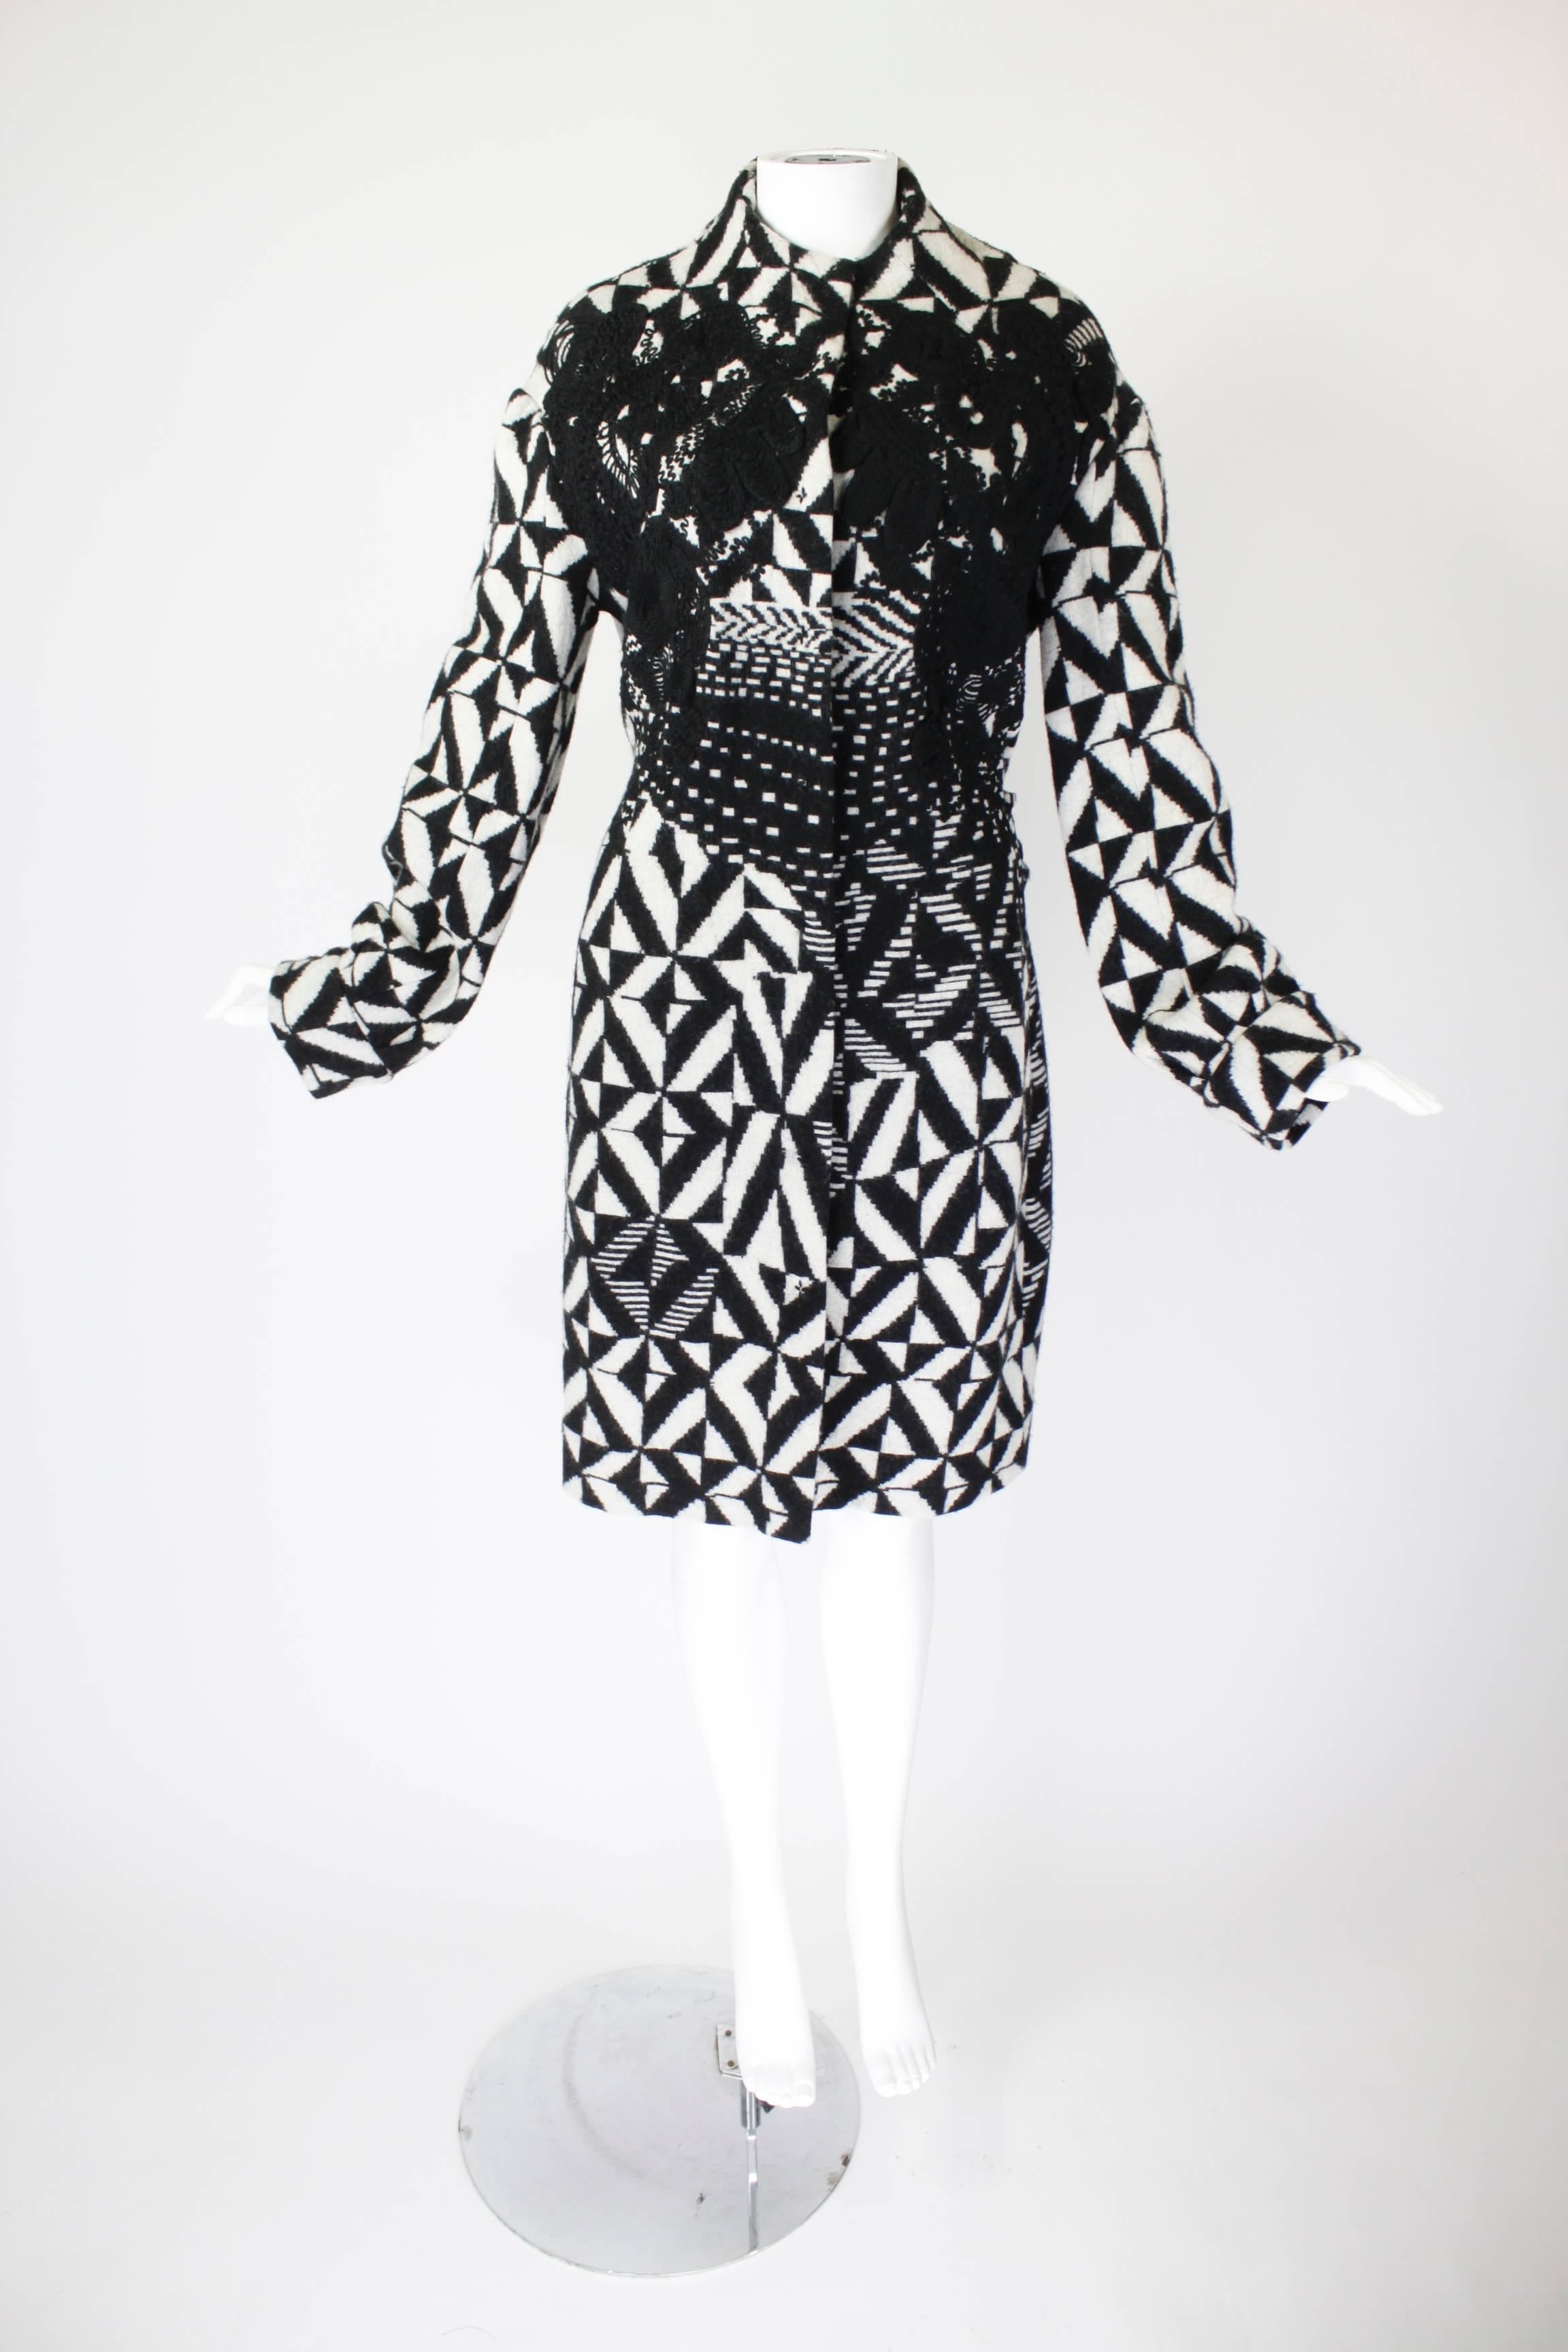 Christian Lacroix Black and White Op Art Coat with Appliqué

-Fully lined
-Snap front closure

Measurements--
Bust: 42 inches
Waist: 36 inches
Hip: 44 inches
Length, Center Back to Hem: 44 inches
Length, Shoulder to Shoulder: 21